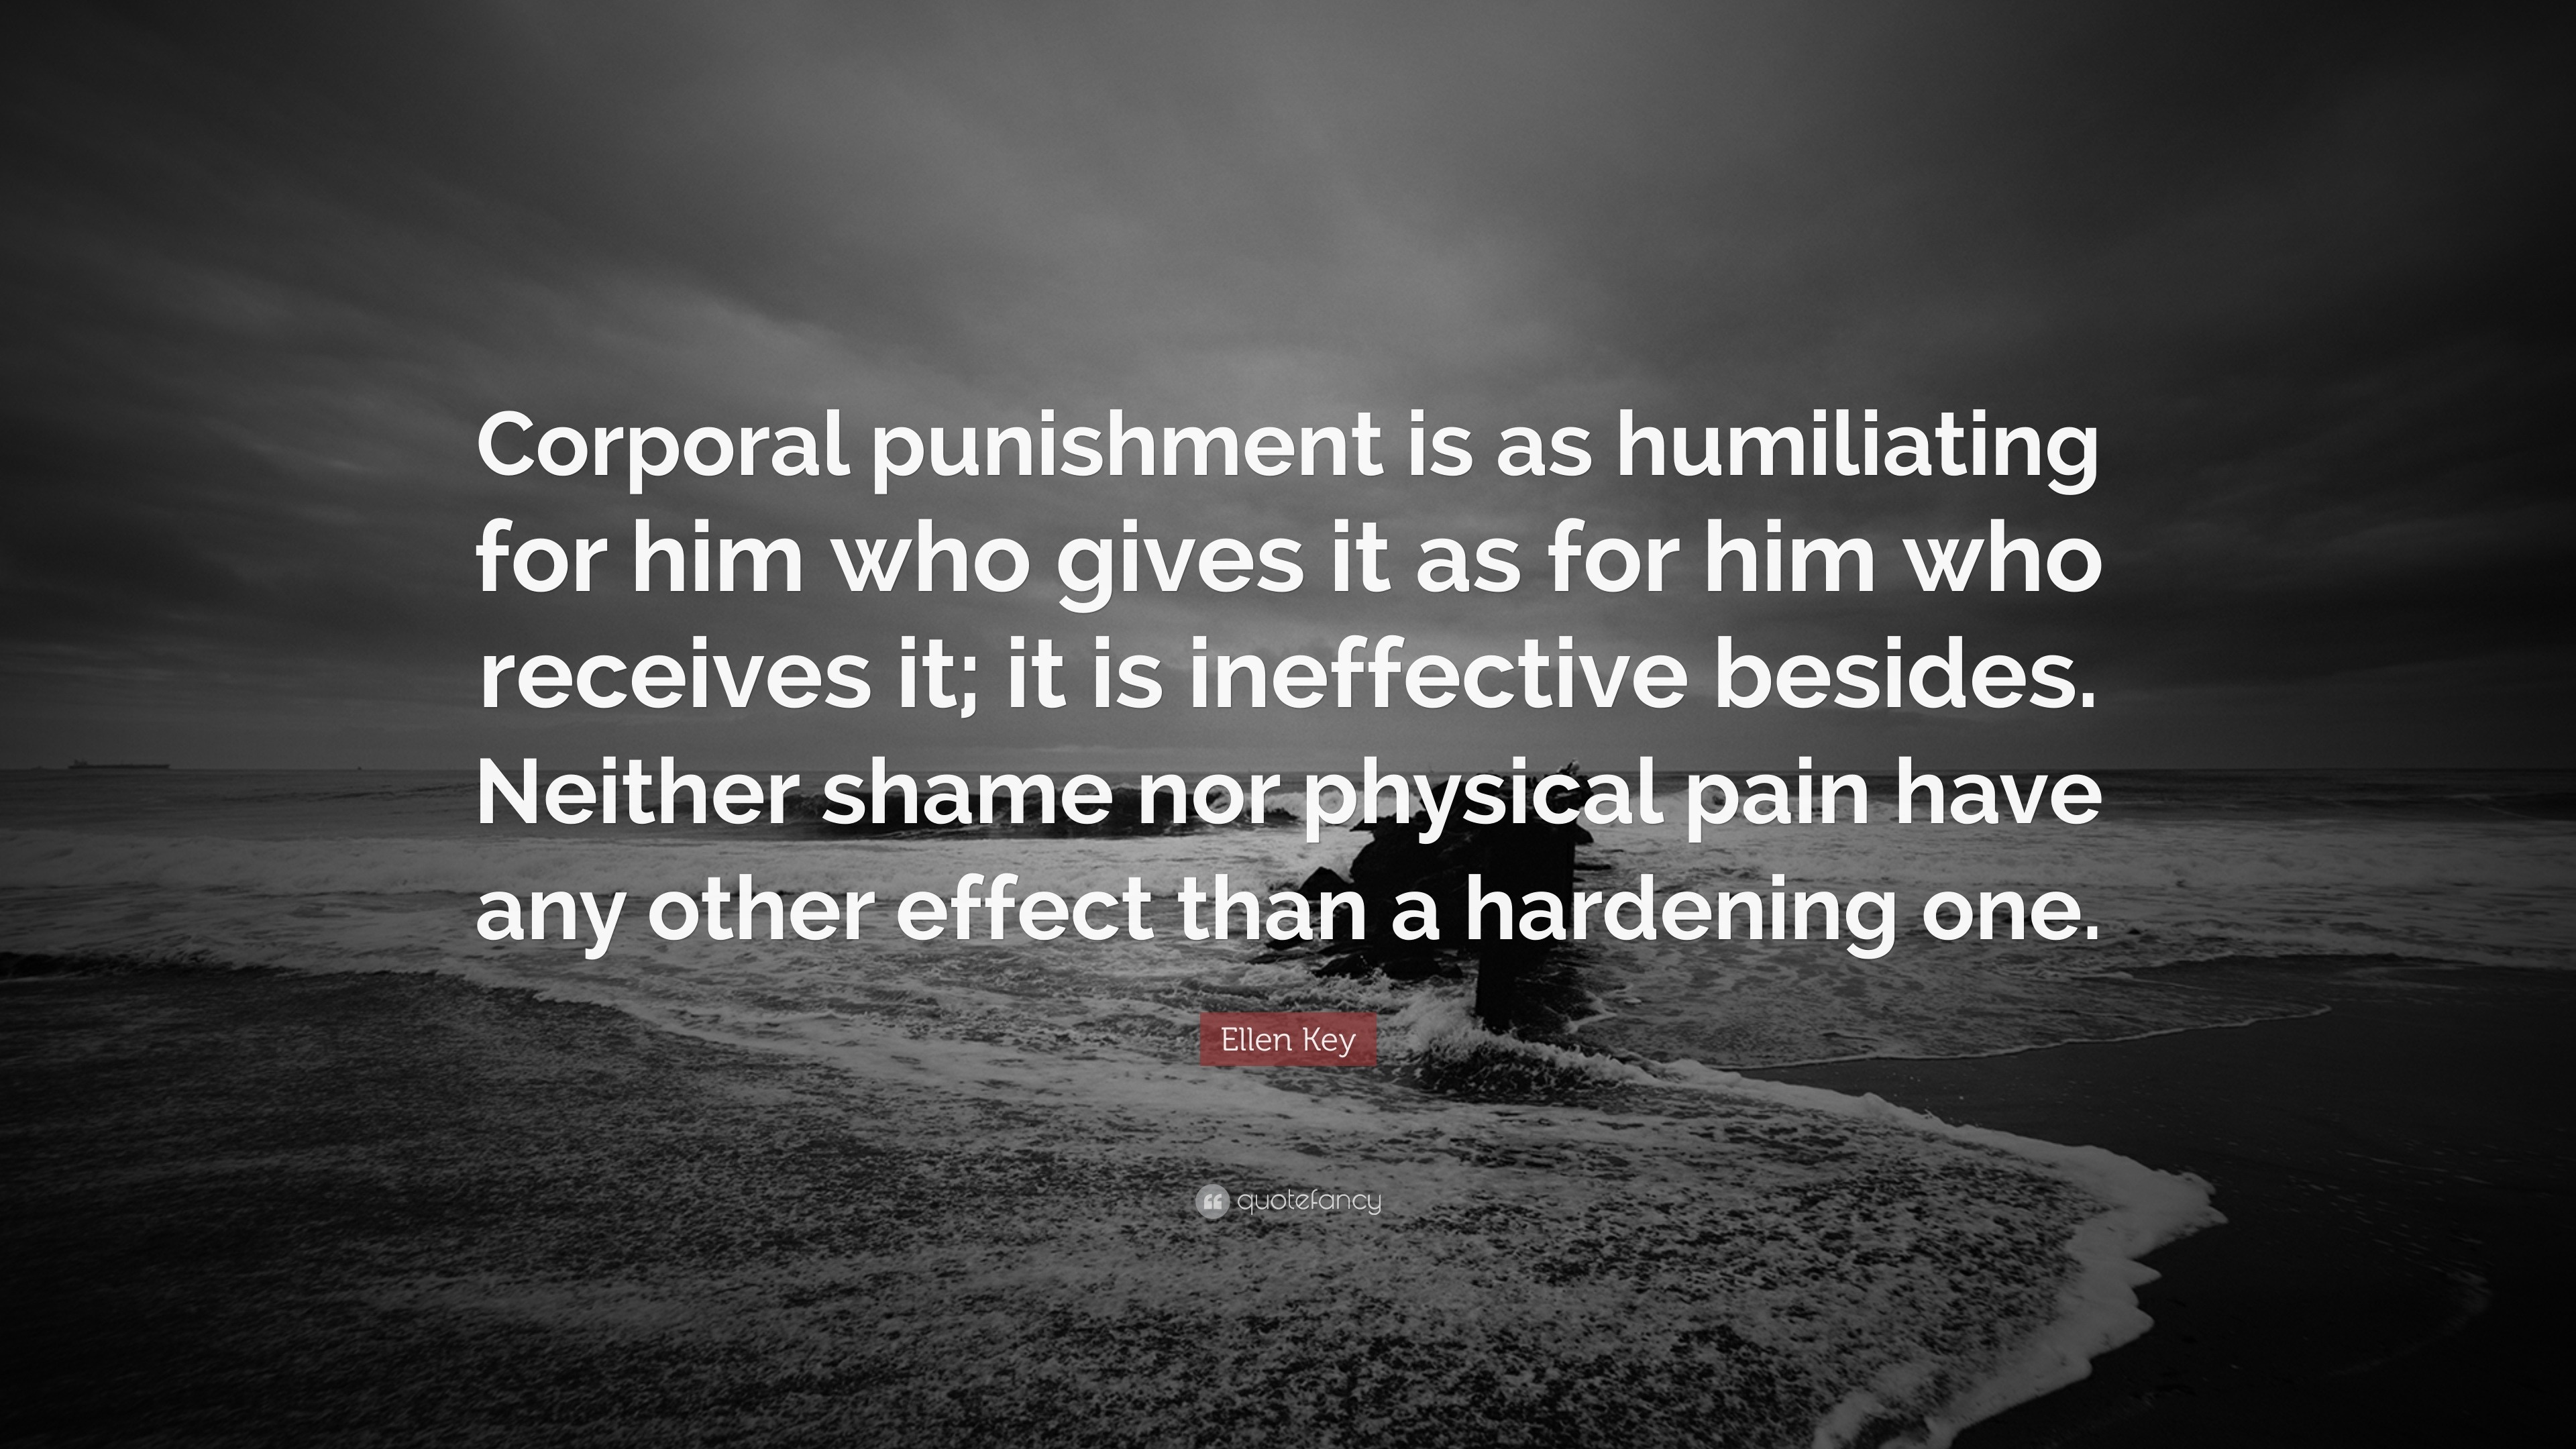 Ellen Key Quote: "Corporal punishment is as humiliating ...